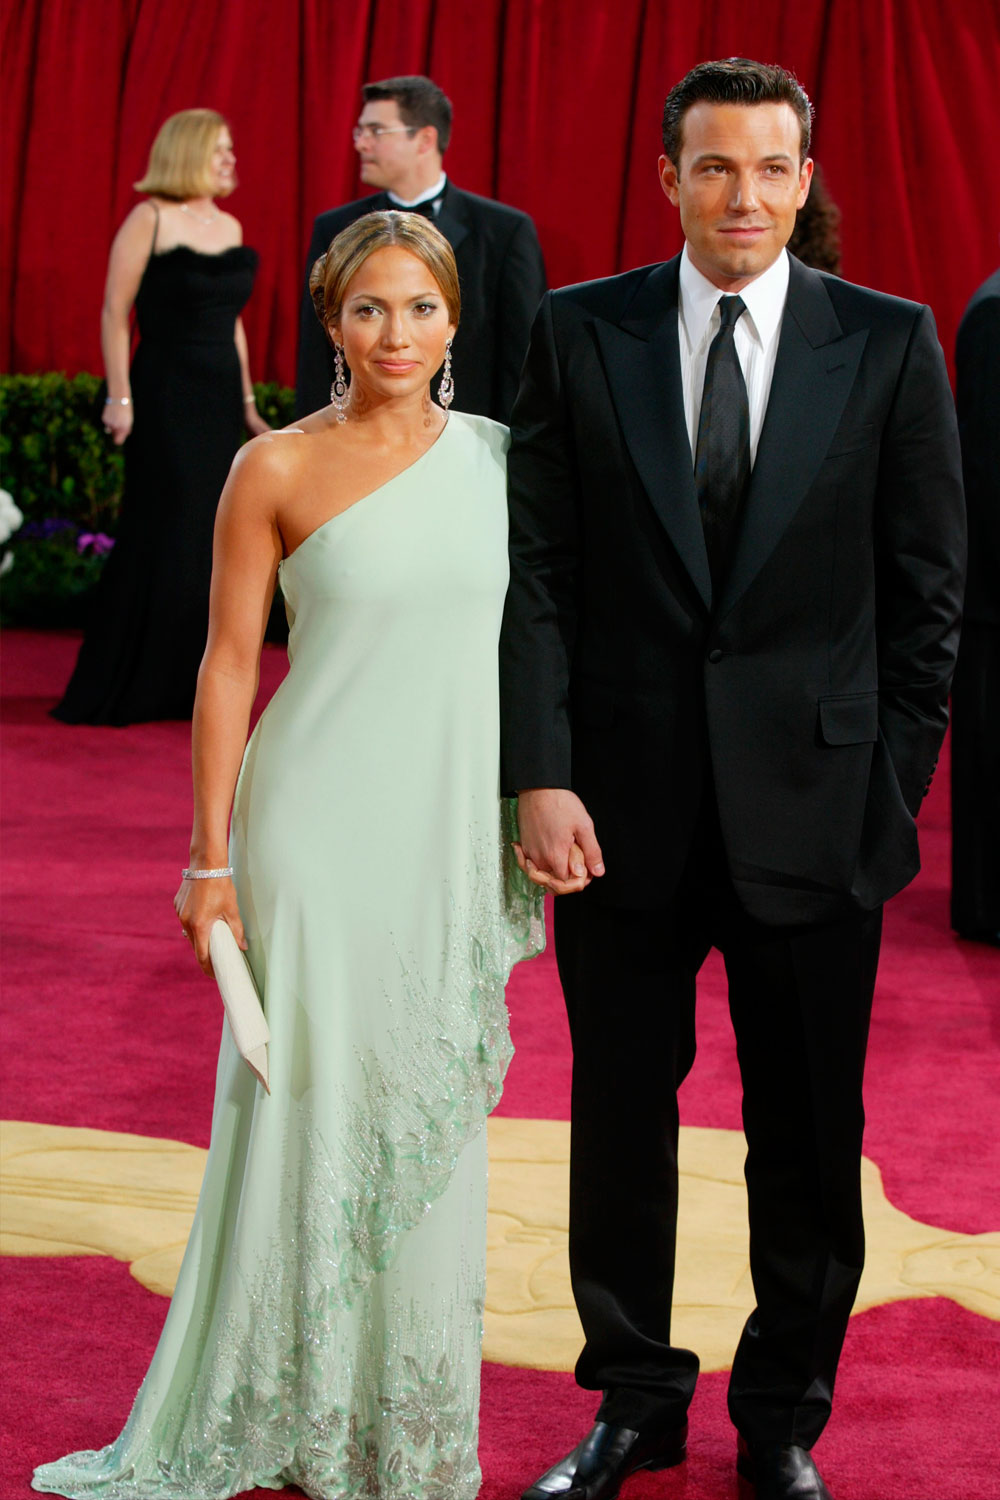 Jennifer Lopez, in Valentino, with Ben Affleck, at the 2003 Academy Awards.